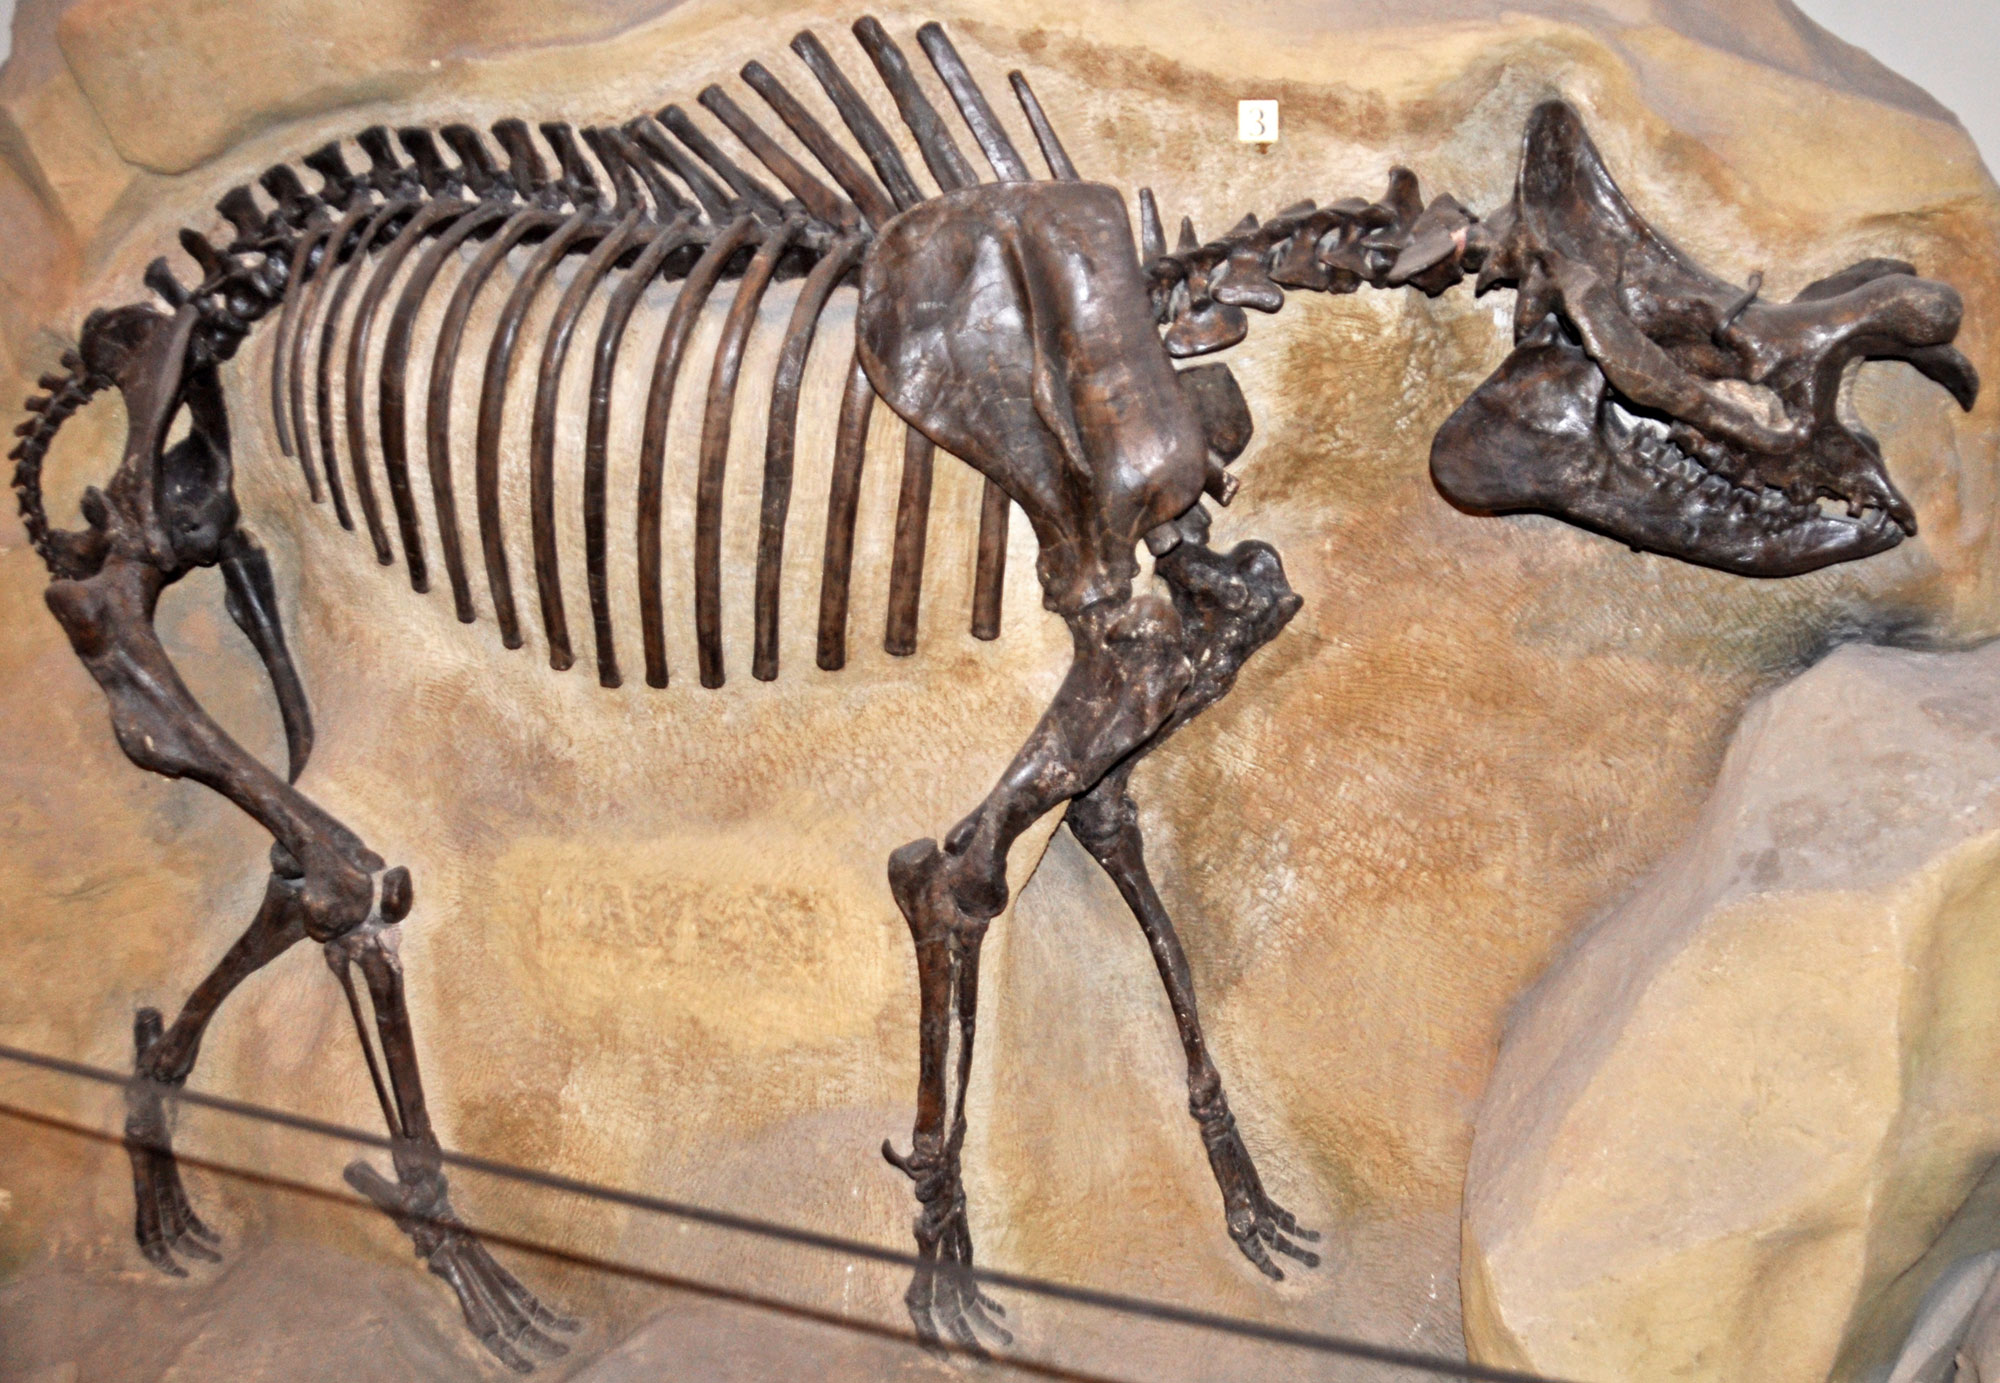 Mounted skeleton of a titanothere on display in a museum. The titanothere is an extinct mammal with a large, rhino-like head. It has bony projects on the top front of its face. It walked on four legs, had a short tail, and had toes (not hooves). It was a large animal that ate plants.